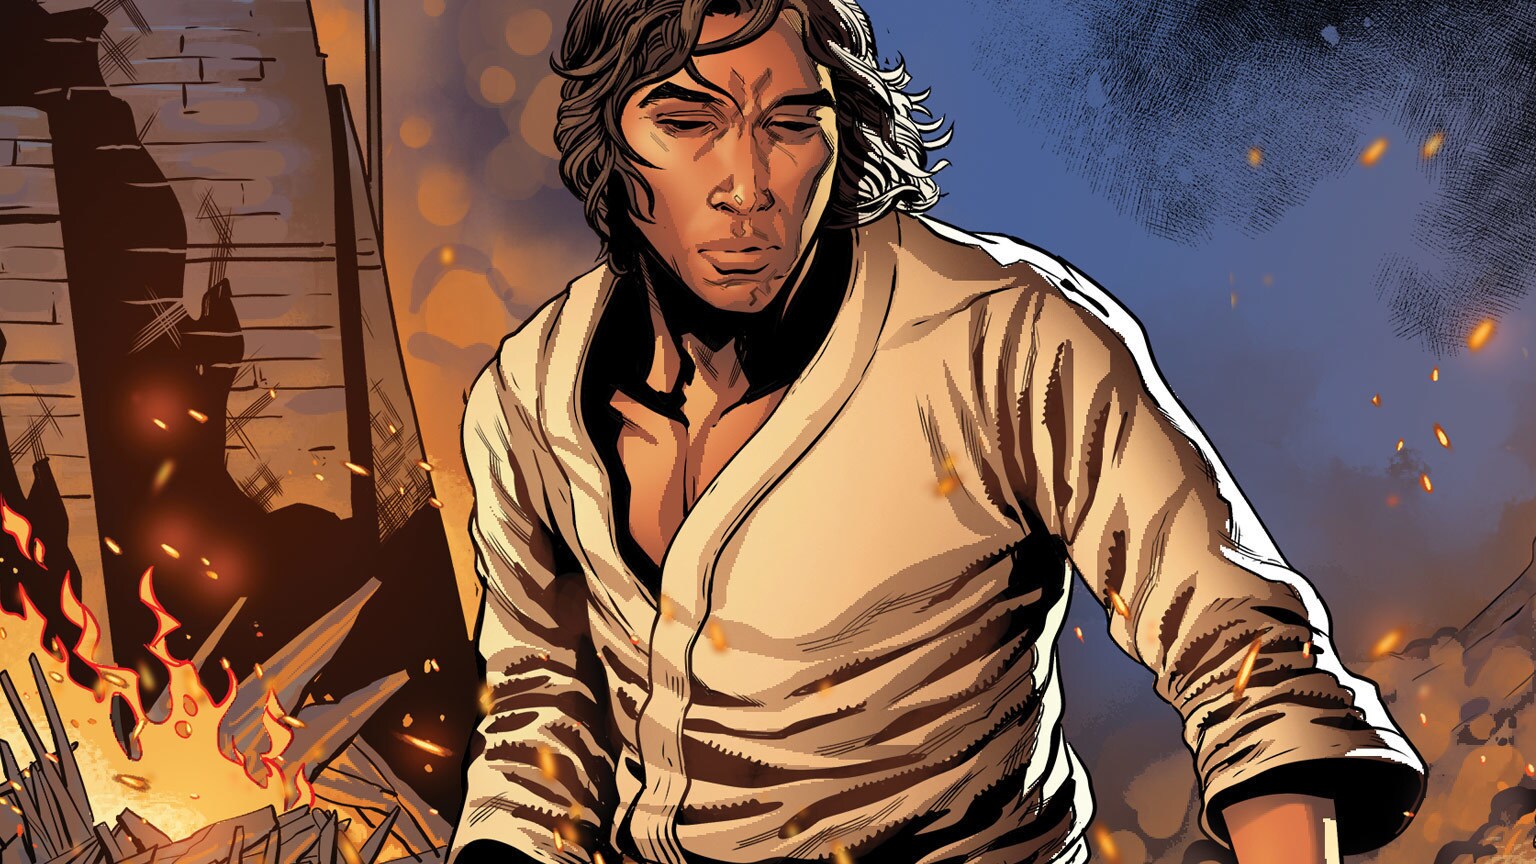 Ben Solo's Hate Grows in The Rise of Kylo Ren #1 - Exclusive